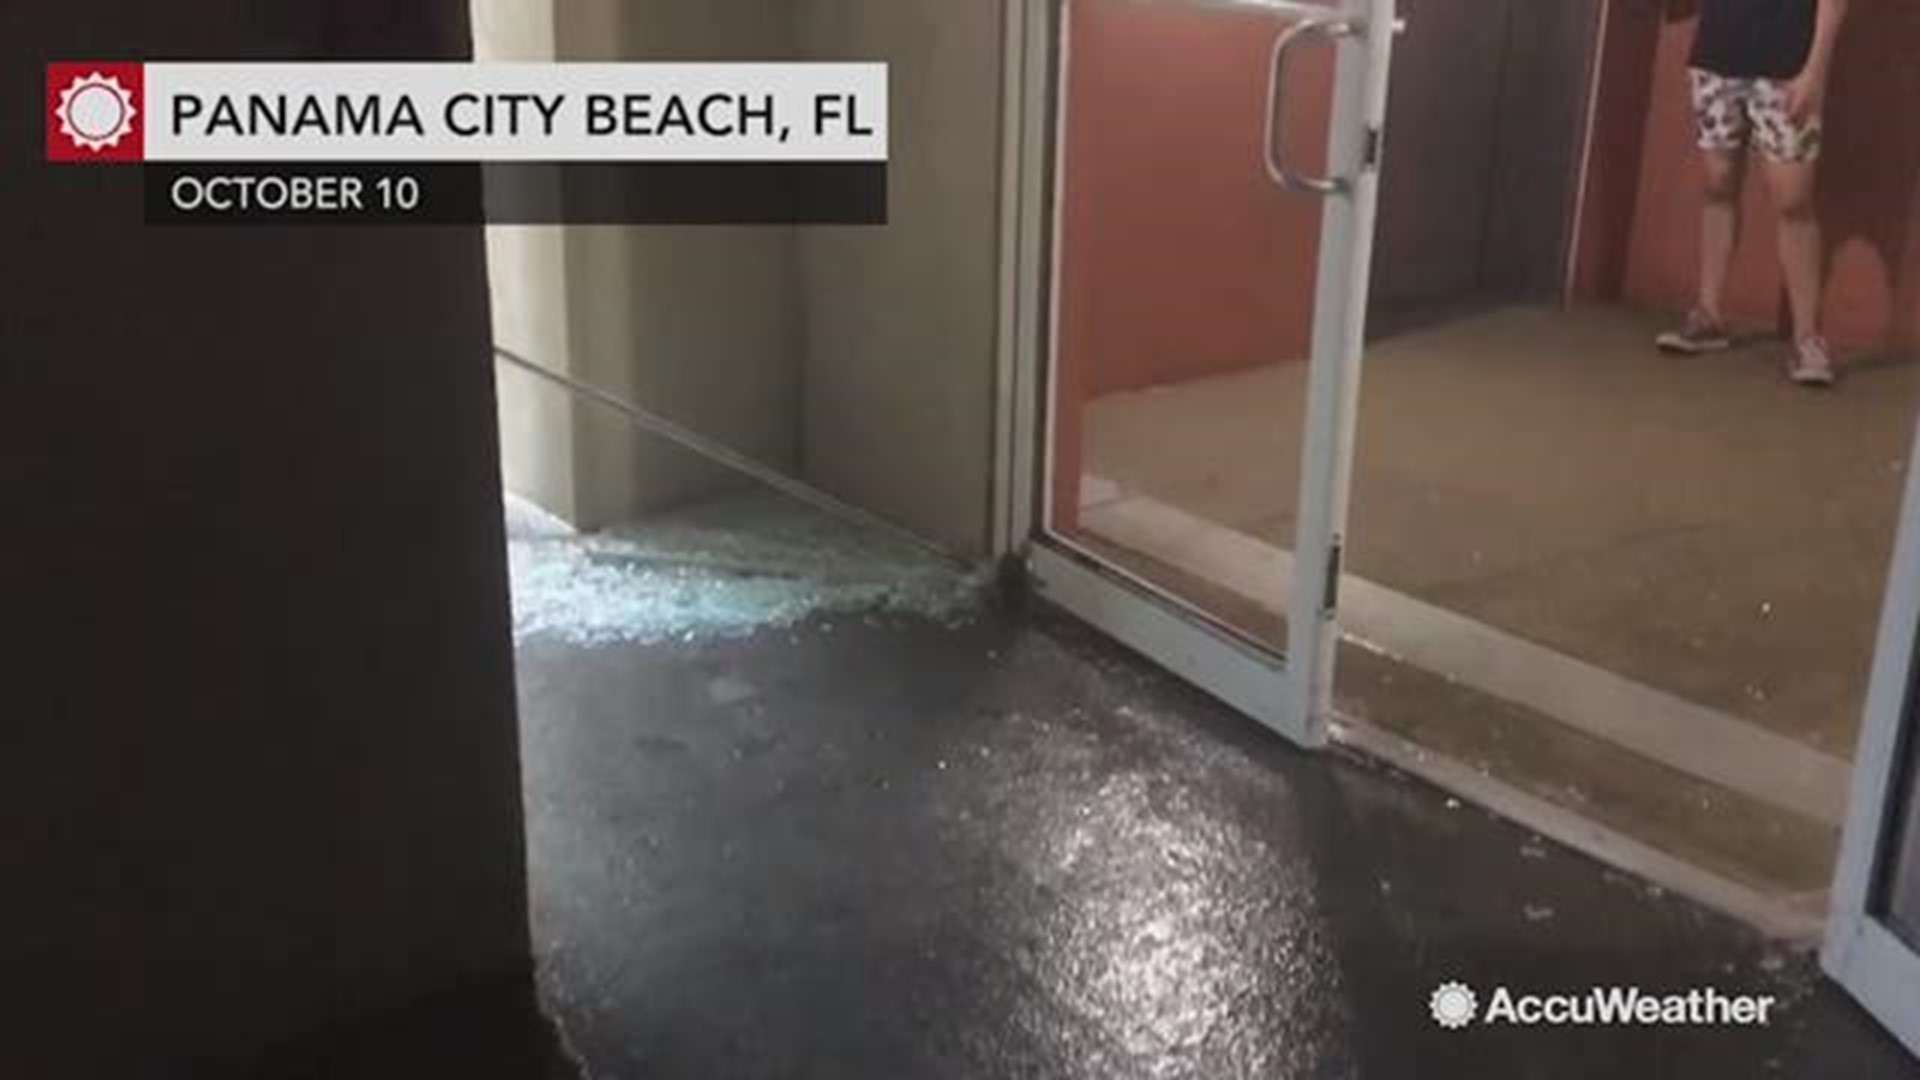 These condo doors were blown open by Hurricane Michael's ferocious winds causing shattered glass shards to fly through the air in Panama City Beach, Florida.